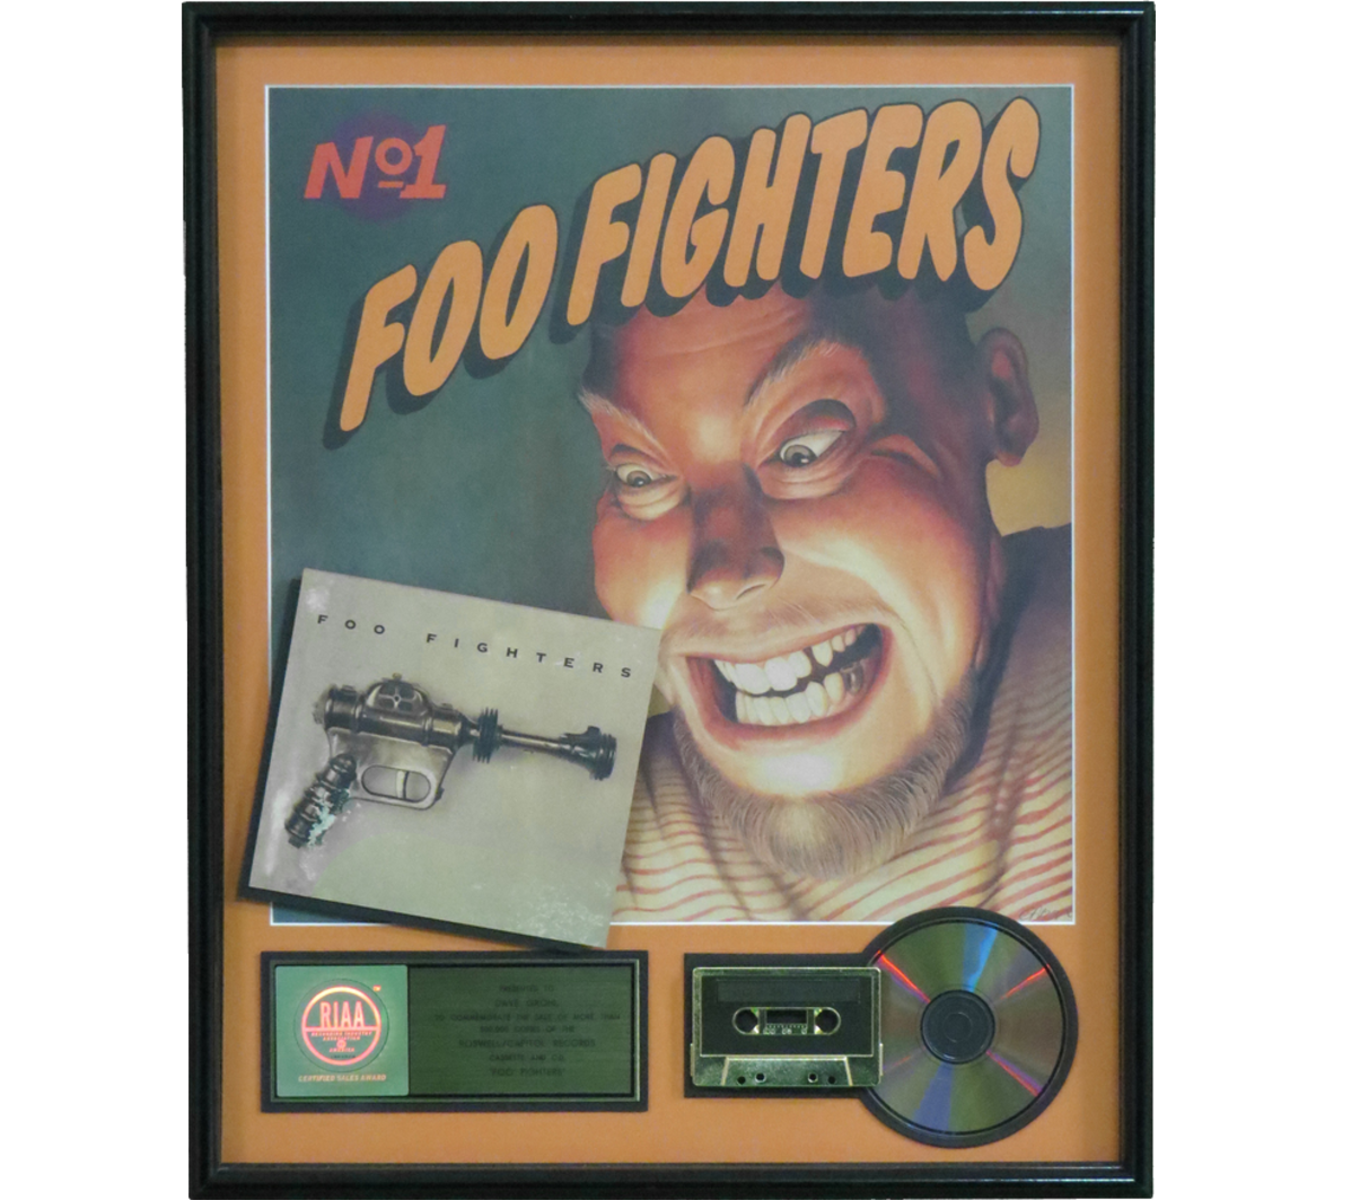 Foo Fighters Debut Album RIAA Gold Award Presented to Dave Grohl